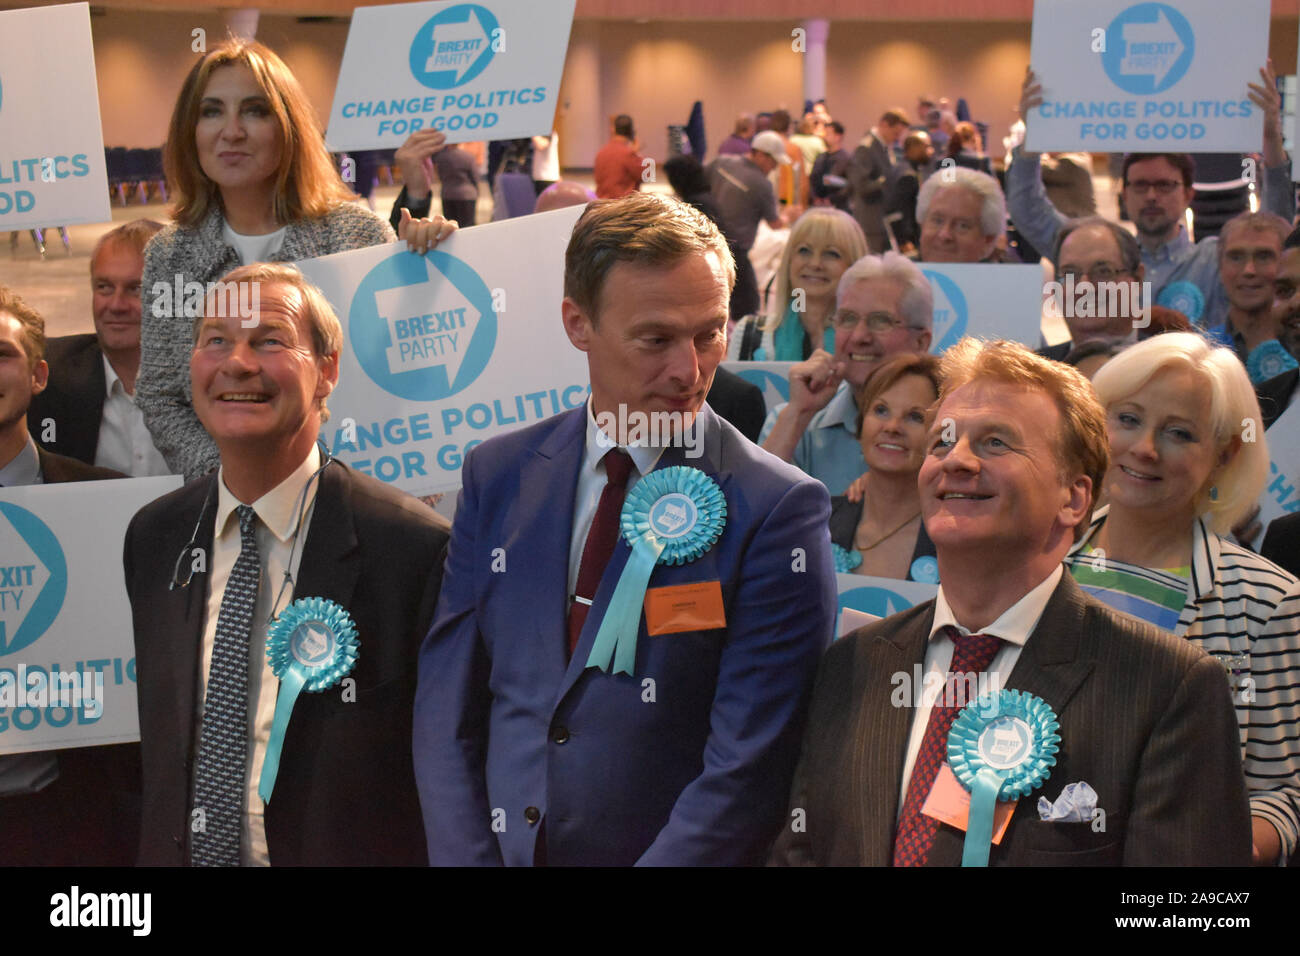 Previously unissued photo dated 26/5/19 of the Brexit Party's three winning candidates in the West Midlands region (left to right) Rupert Lowe, Martin Daubney and Andrew Kerr alongside supporters at Birmingham's International Convention Centre. Prominent Brexit Party MEP Rupert Lowe has revealed he will not contest Dudley North as the 4pm deadline for General Election candidate nominations passed. Stock Photo